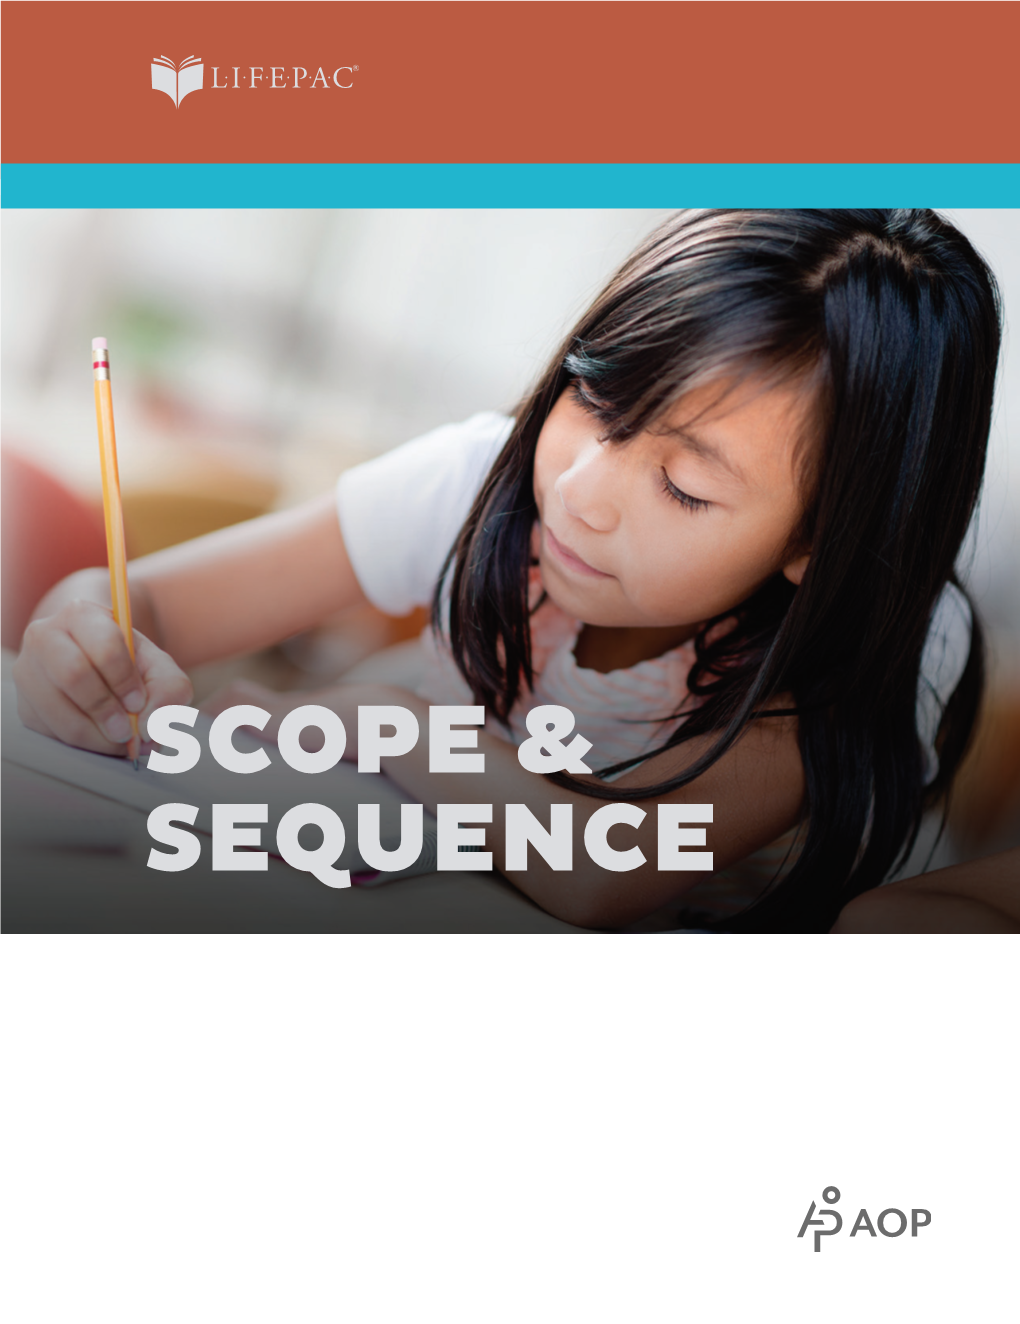 LIFEPAC® Scope & Sequence